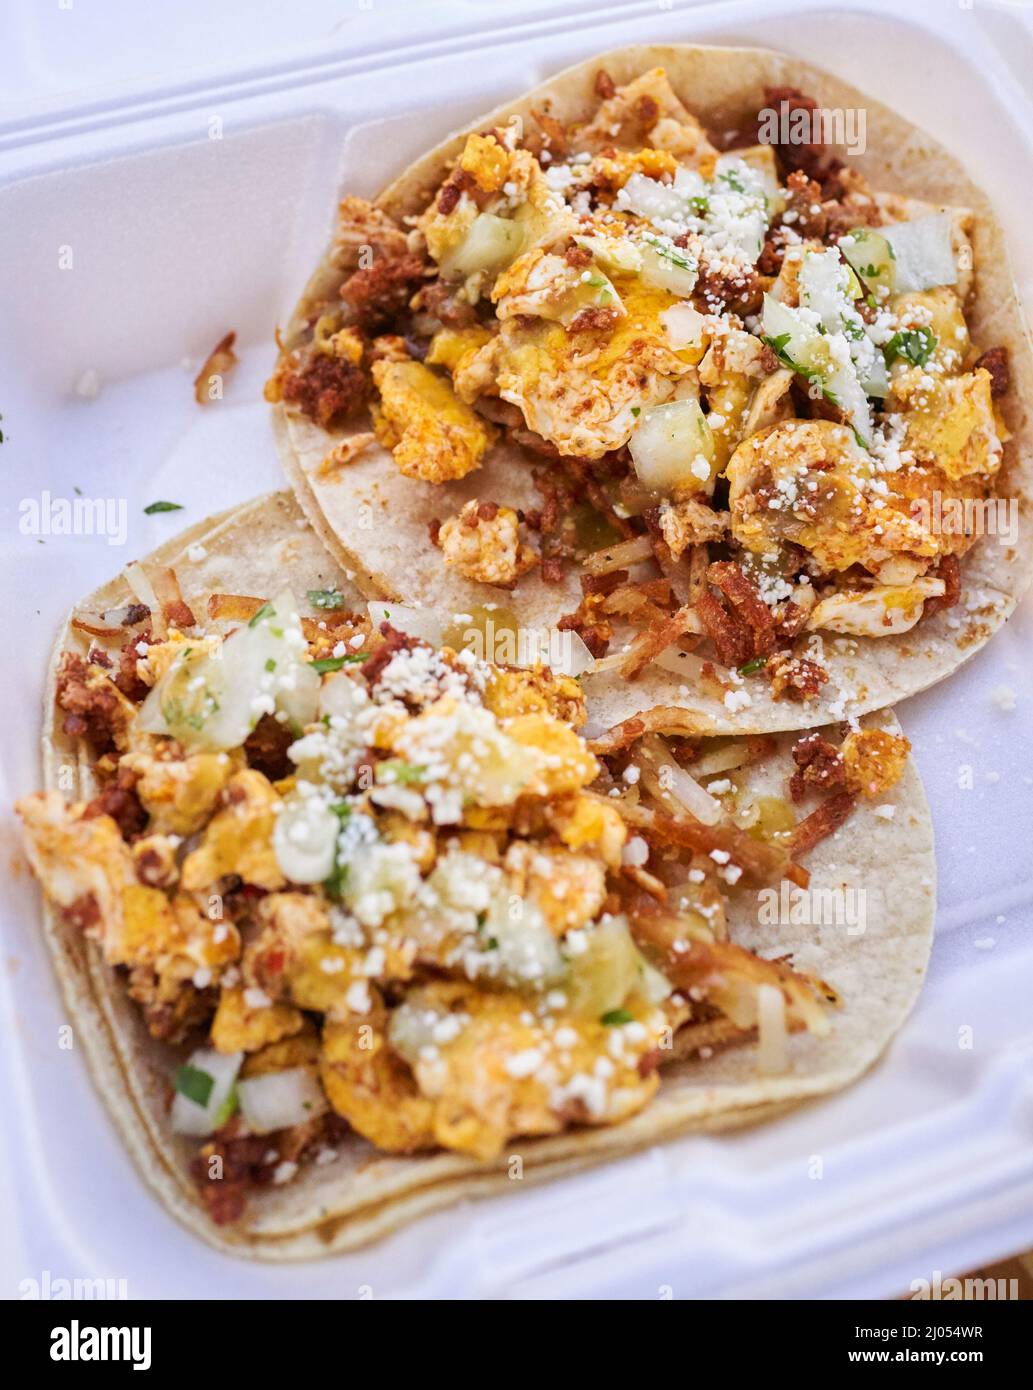 Breakfast Tacos to go in Key West, Florida, FL USA. Southern most point in the continental USA. Island vacation destination for relaxed tourism. Stock Photo